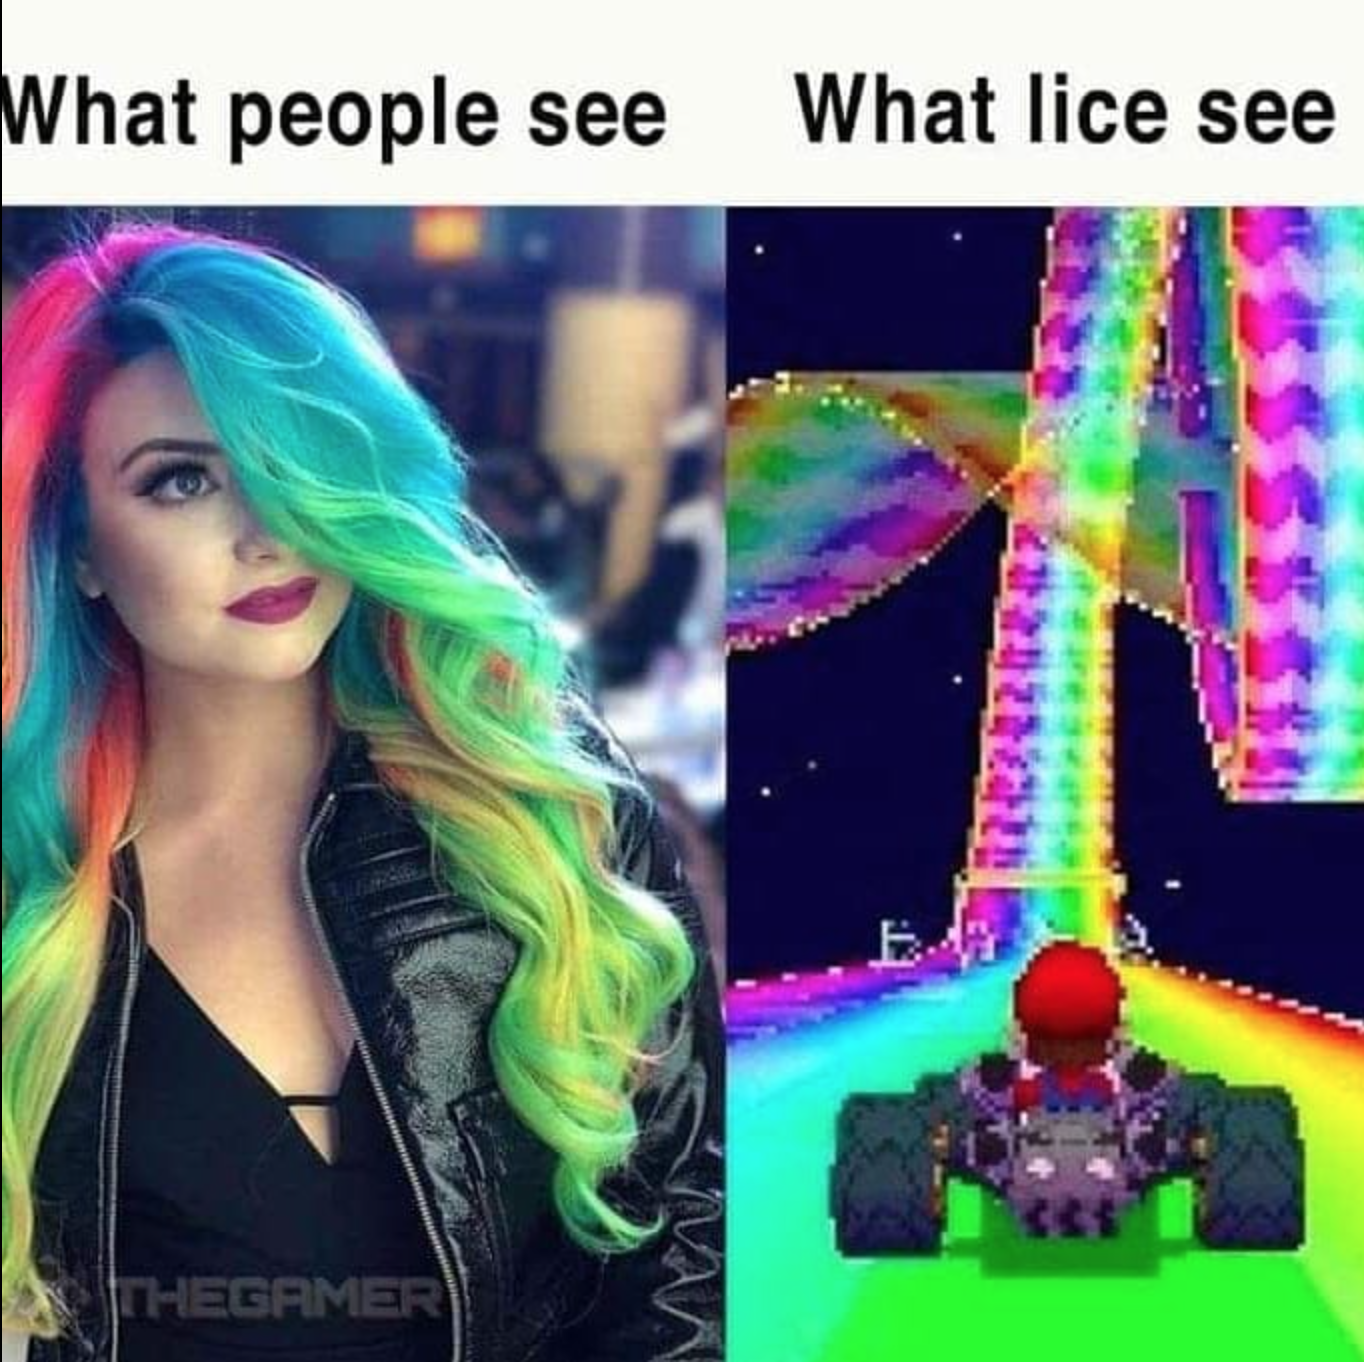 video game memes - mario kart memes - What people see What lice see Chegamer